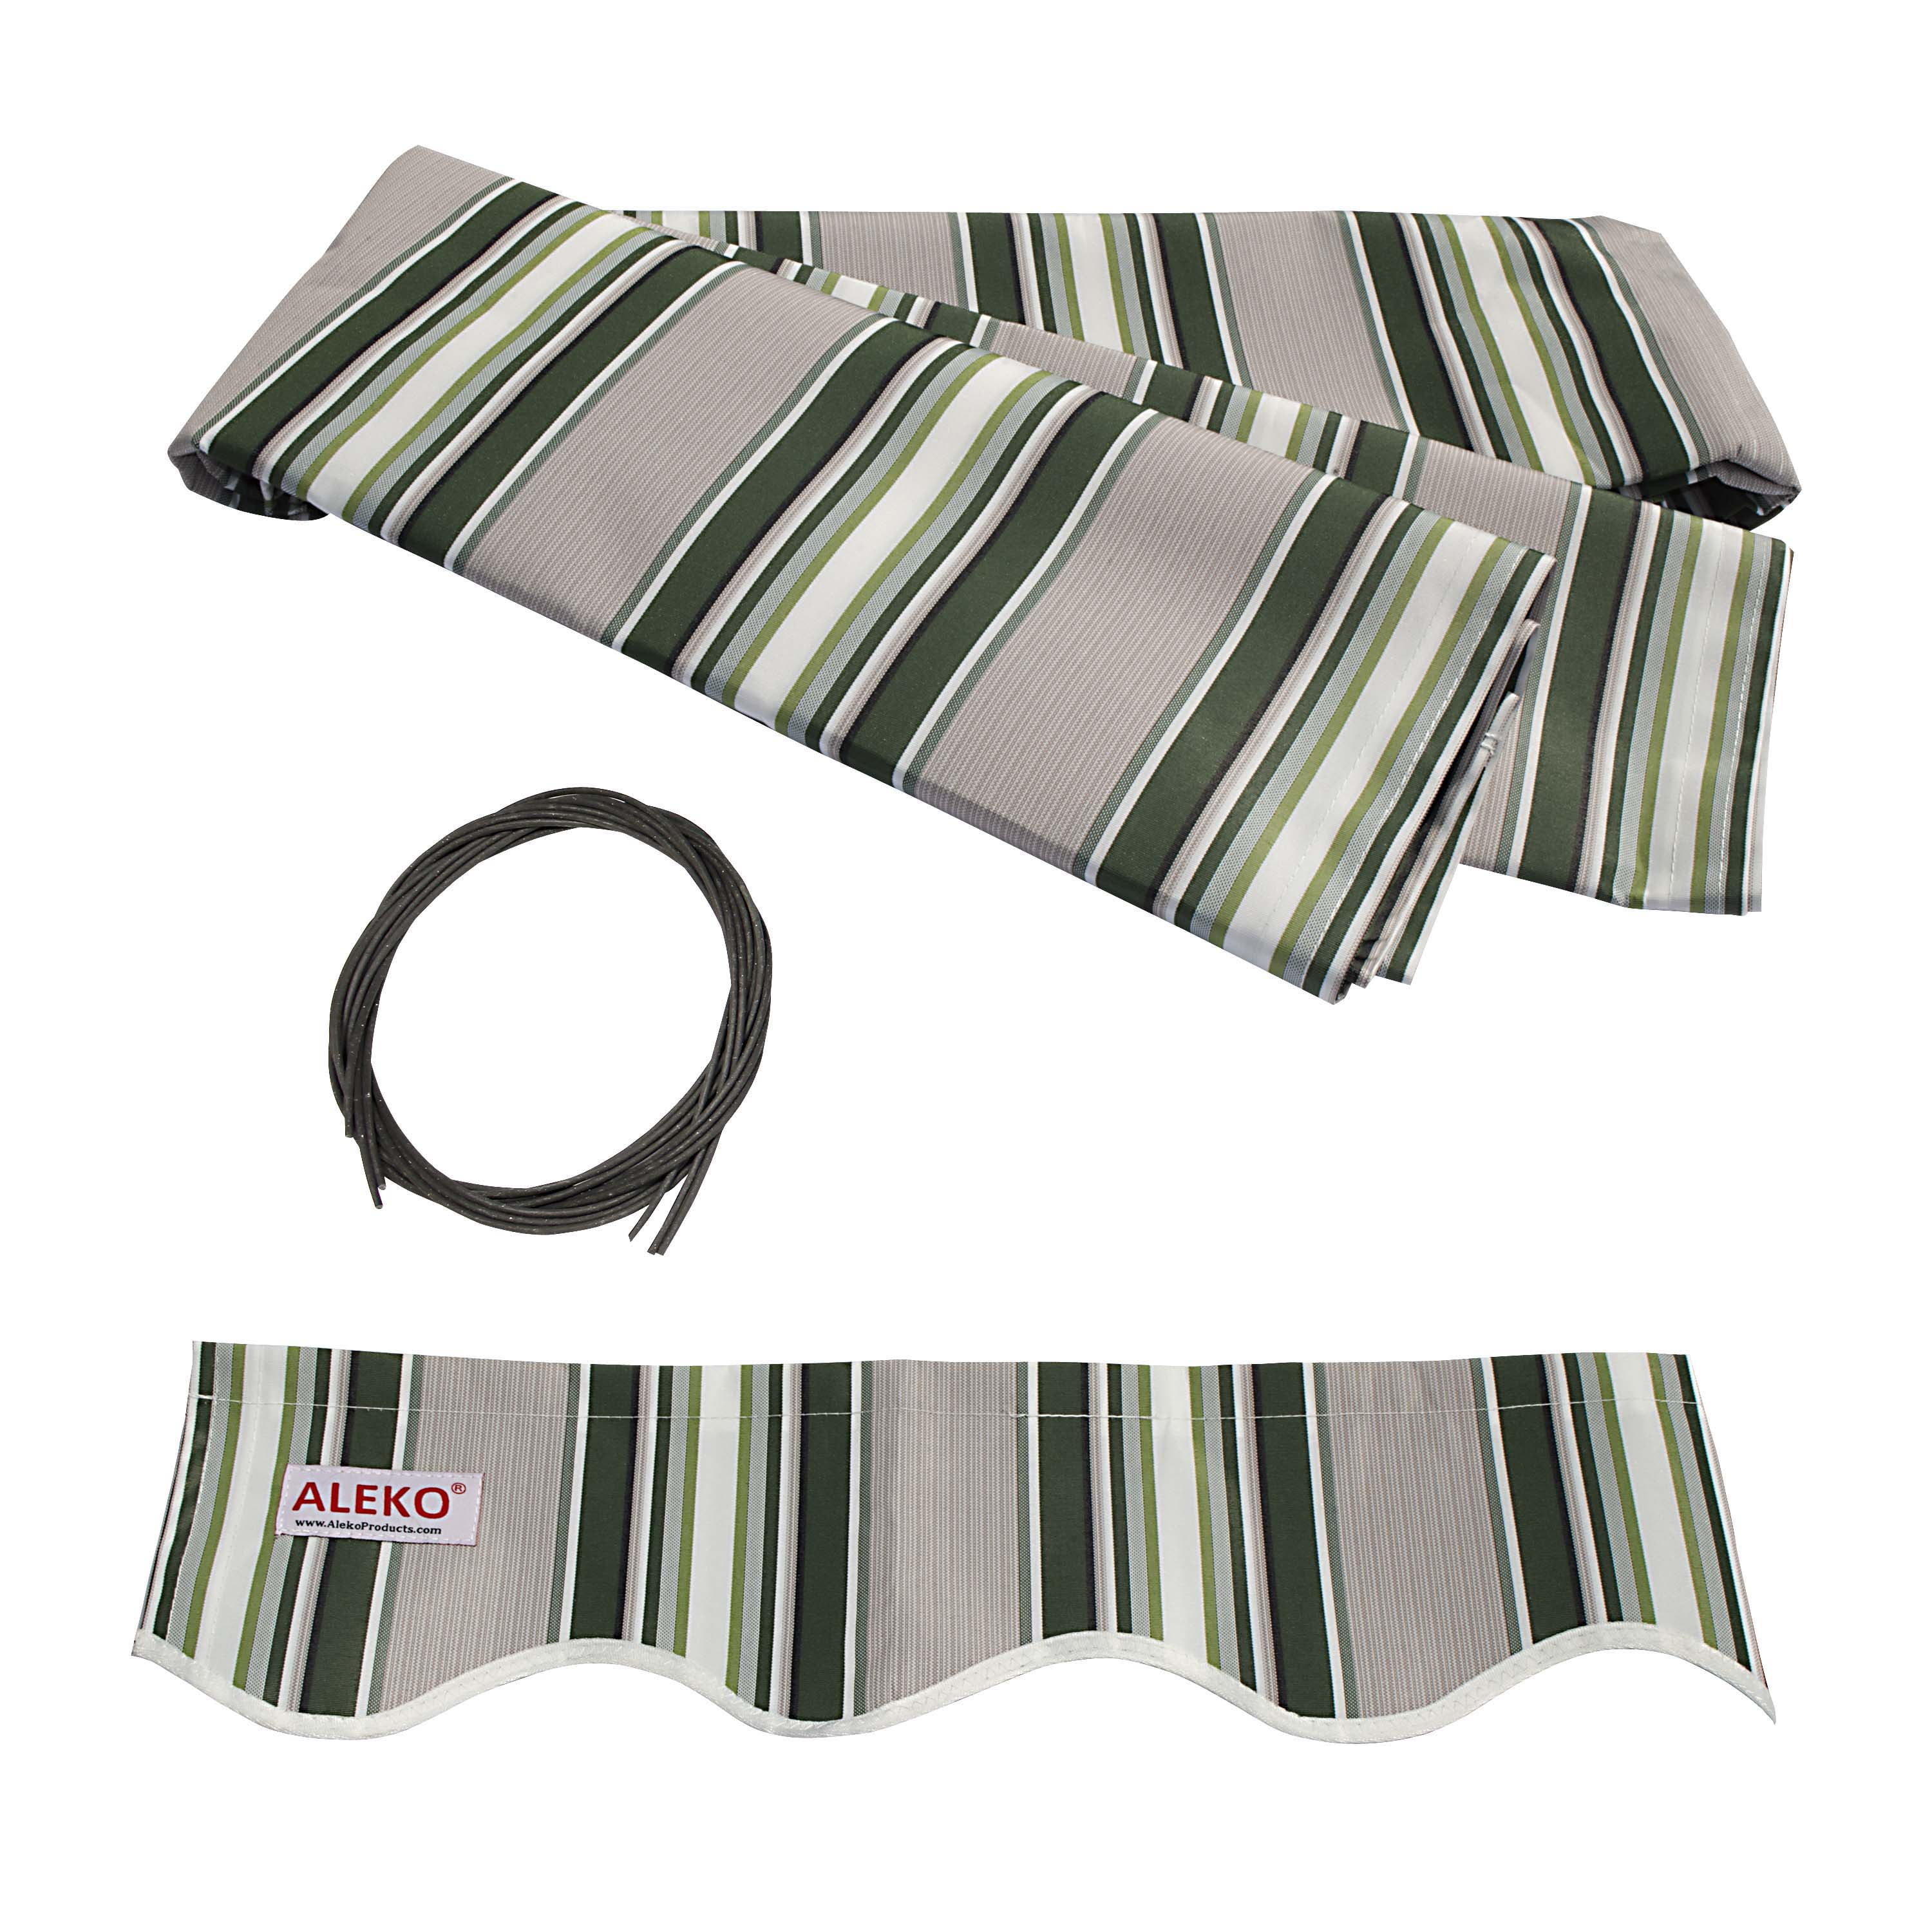 Picture of ALEKO Awning Fabric Replacement for Retractable 8 x 6.5 Ft Awning Multi Green